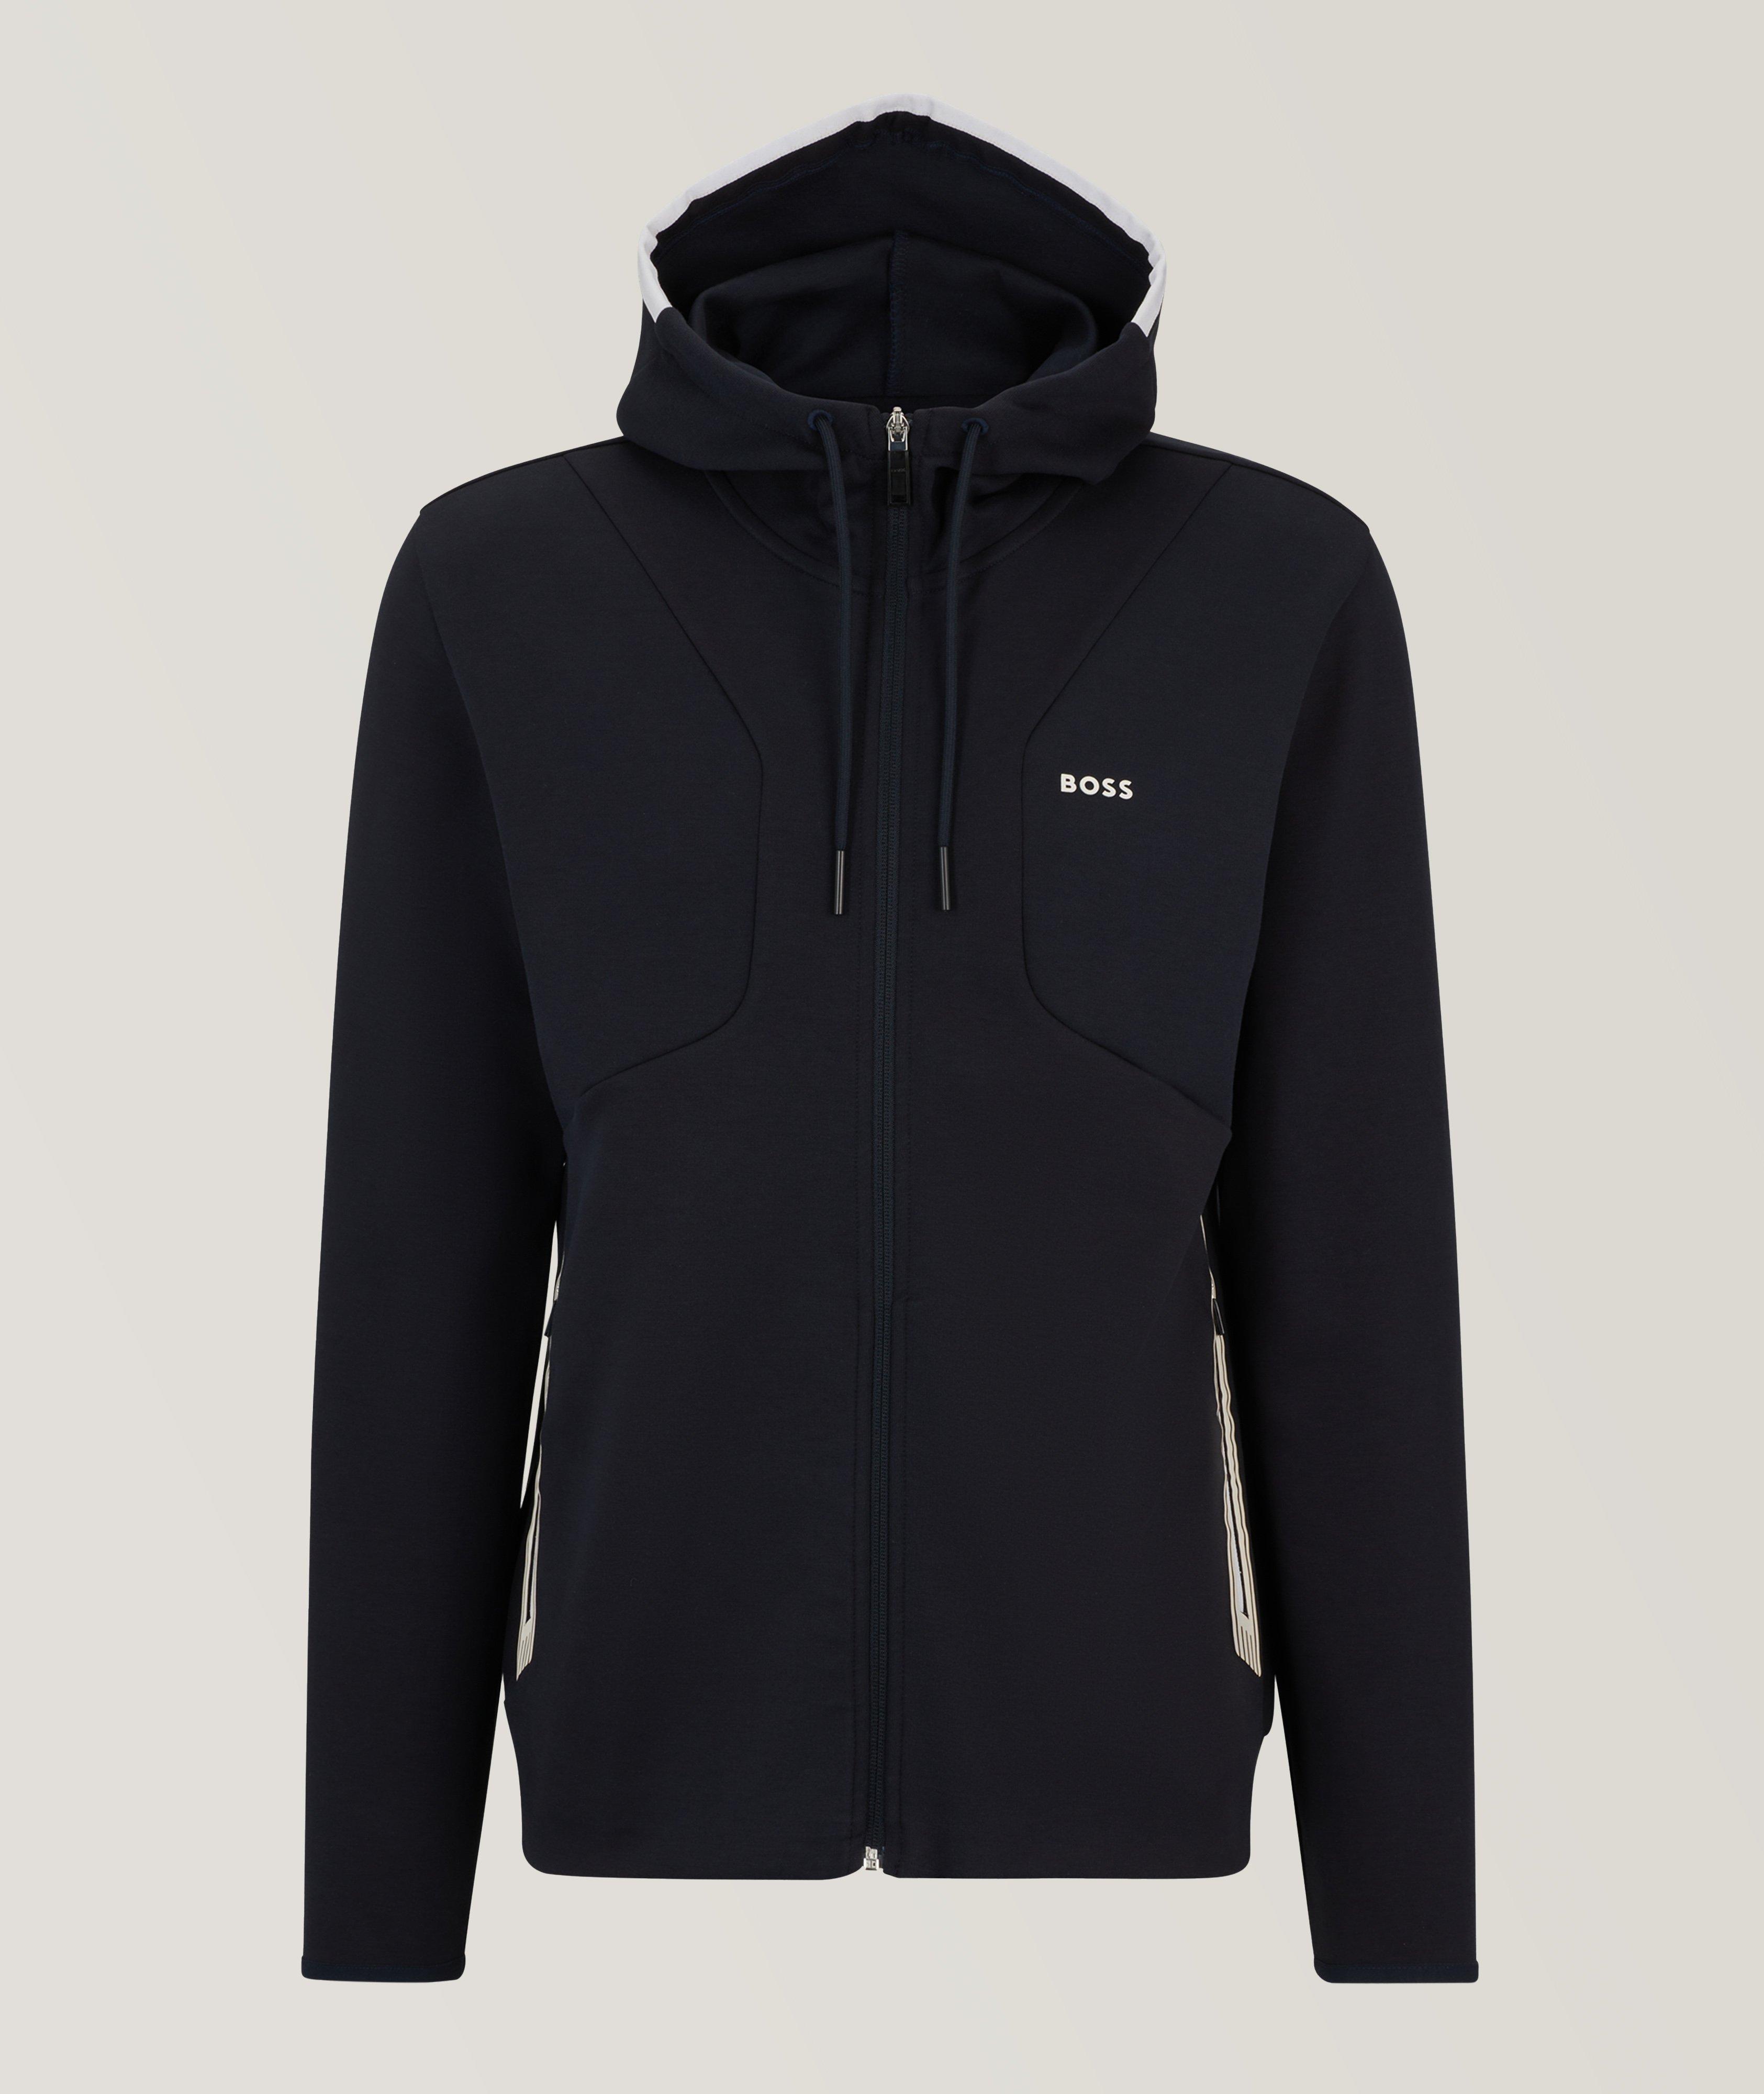 Cotton-Blend Zip-Up Sweater image 0